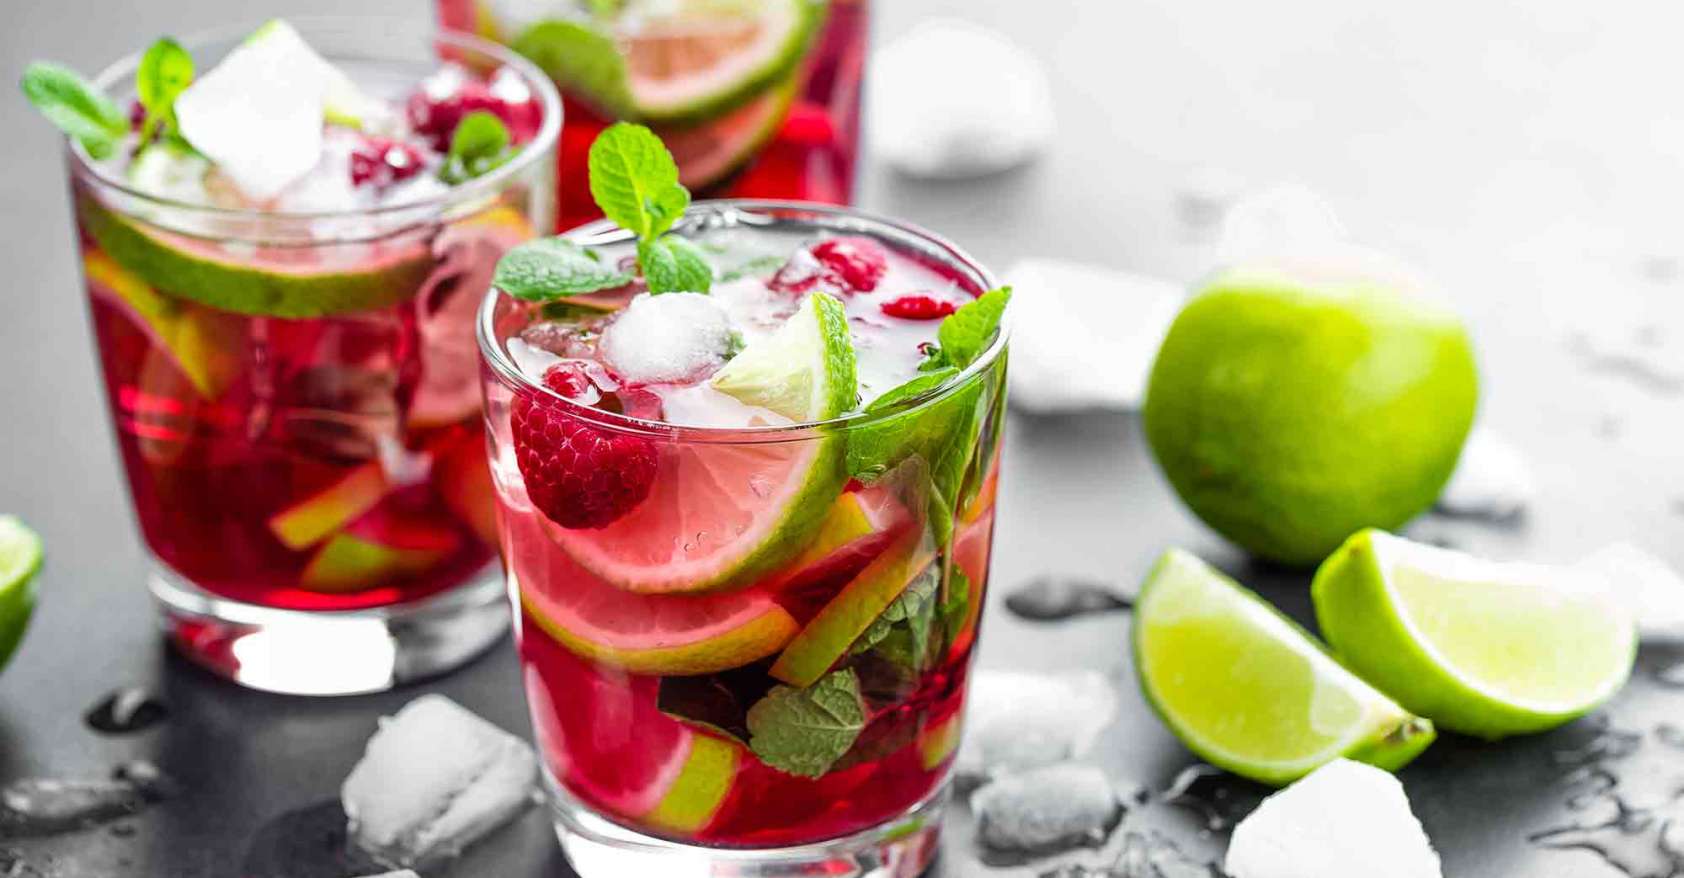 Raspberry-mojito-mocktail-with-lime-mint-and-ice-cold-iced-refreshing-drink-or-beverage Make Mine a Mocktail